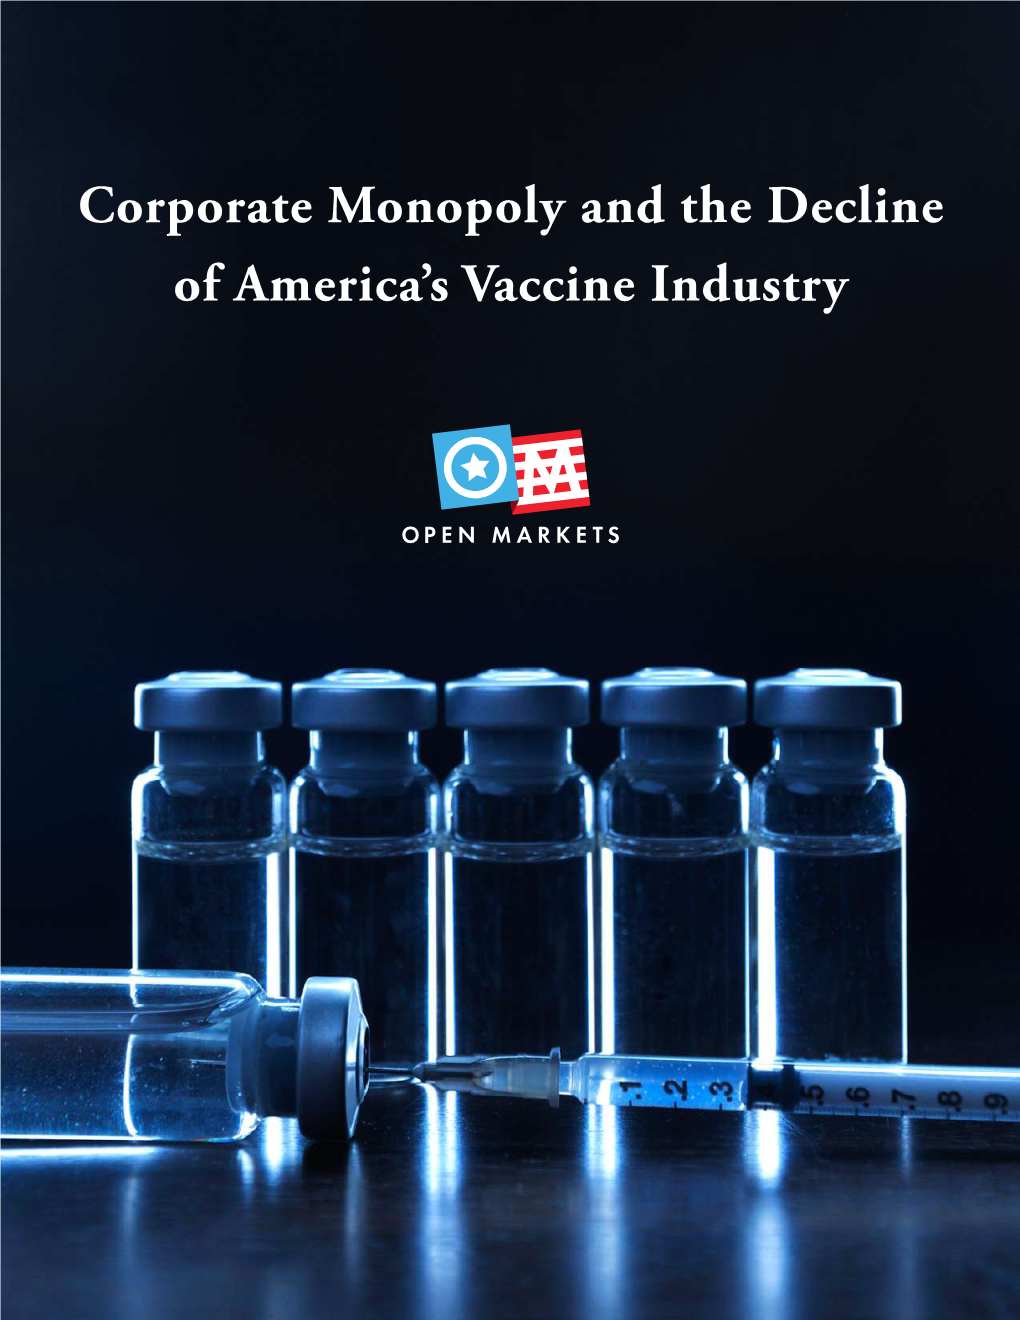 Corporate Monopoly and the Decline of America's Vaccine Industry